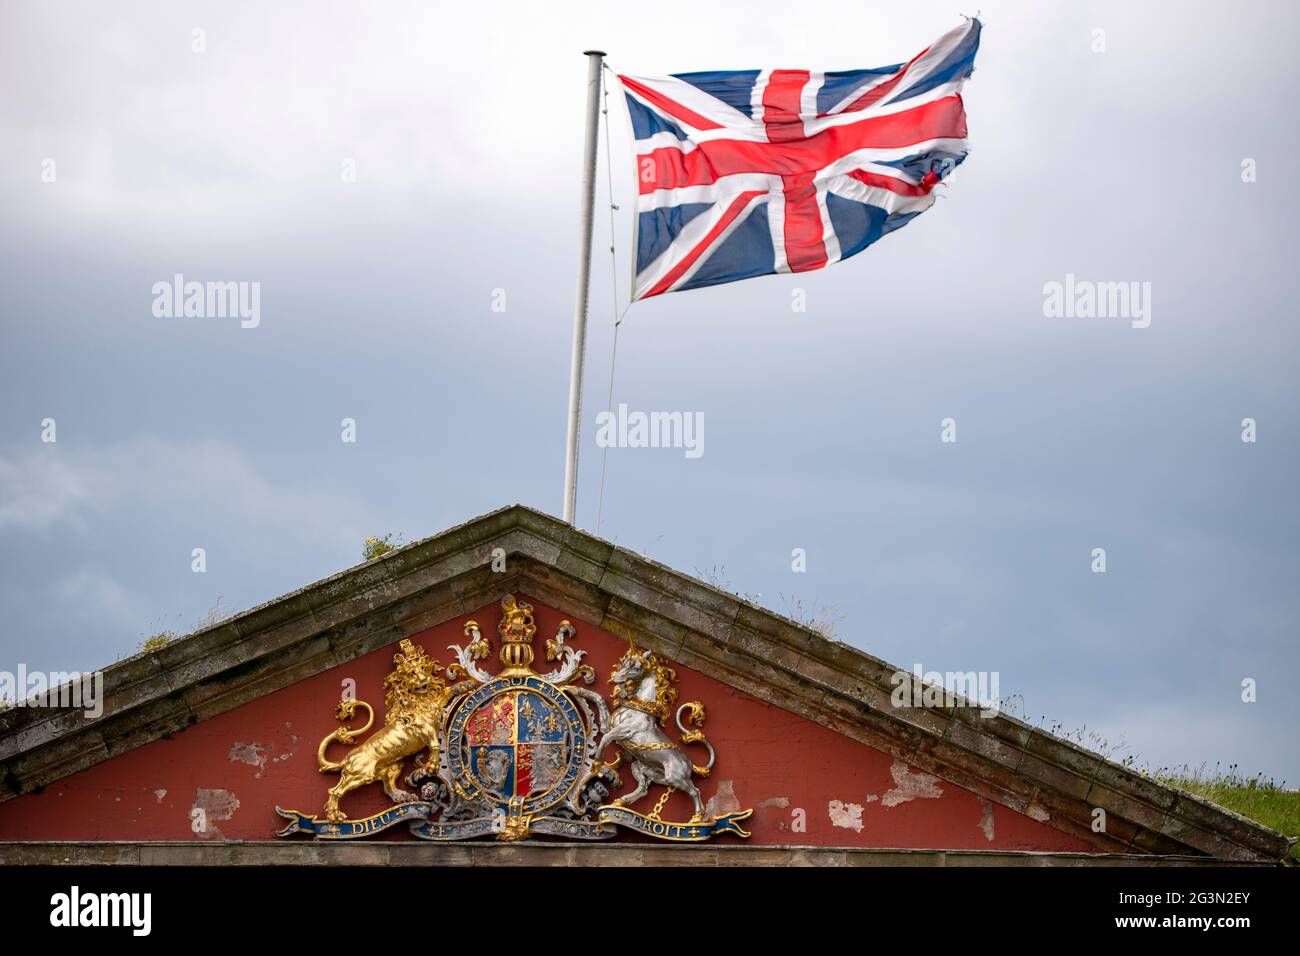 Fort George, Inverness, Scotland, UK. 13 June 2021. Pictured: Union Jack flag flying in the wind seen at Fort George with the Fort George crest which reads, HON SOIT QUI MAL Y PENSE, DIEU ET MON DROIT. Scenes from Fort George.  Credit: Colin Fisher/CDFIMAGES.COM Stock Photo